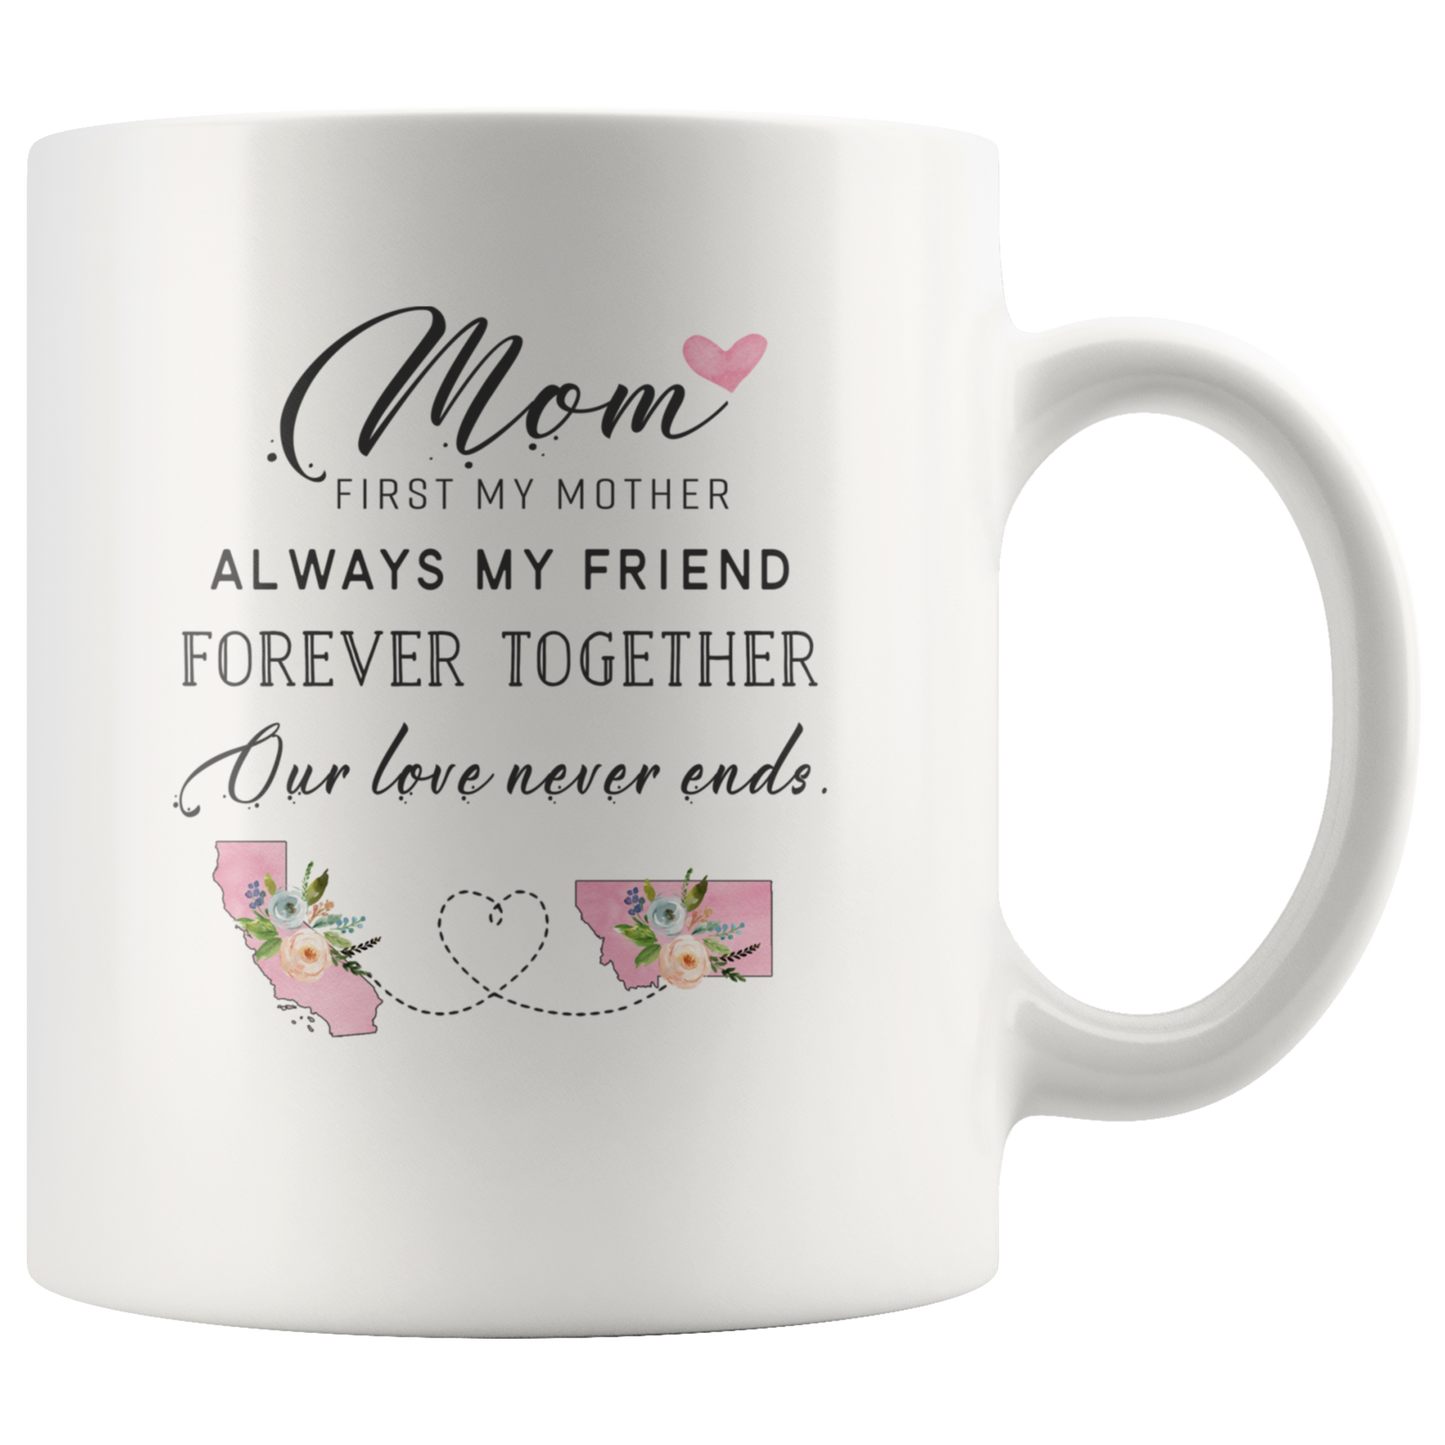 ND-21358832-sp-23346 - Mothers Day Accent Mug Red - Mom, First My Mother Always My